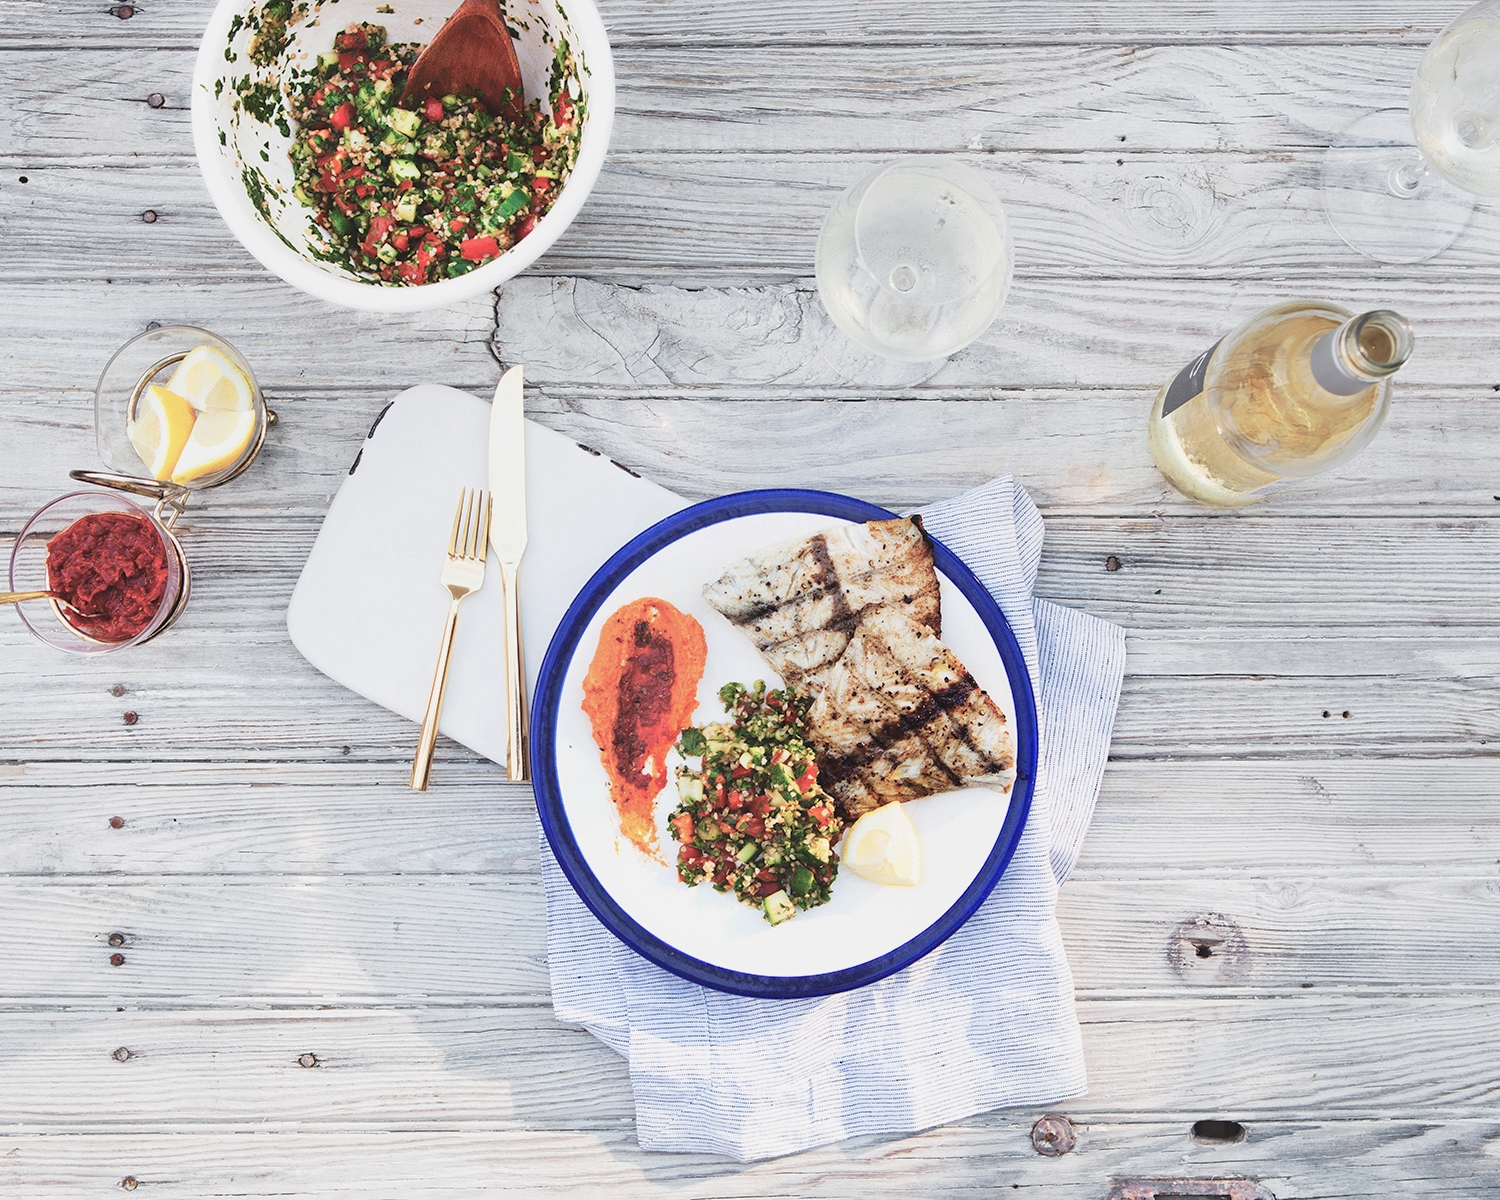 Cumin Grilled Barramundi with Harissa Spiced Hummus and Tabbouleh